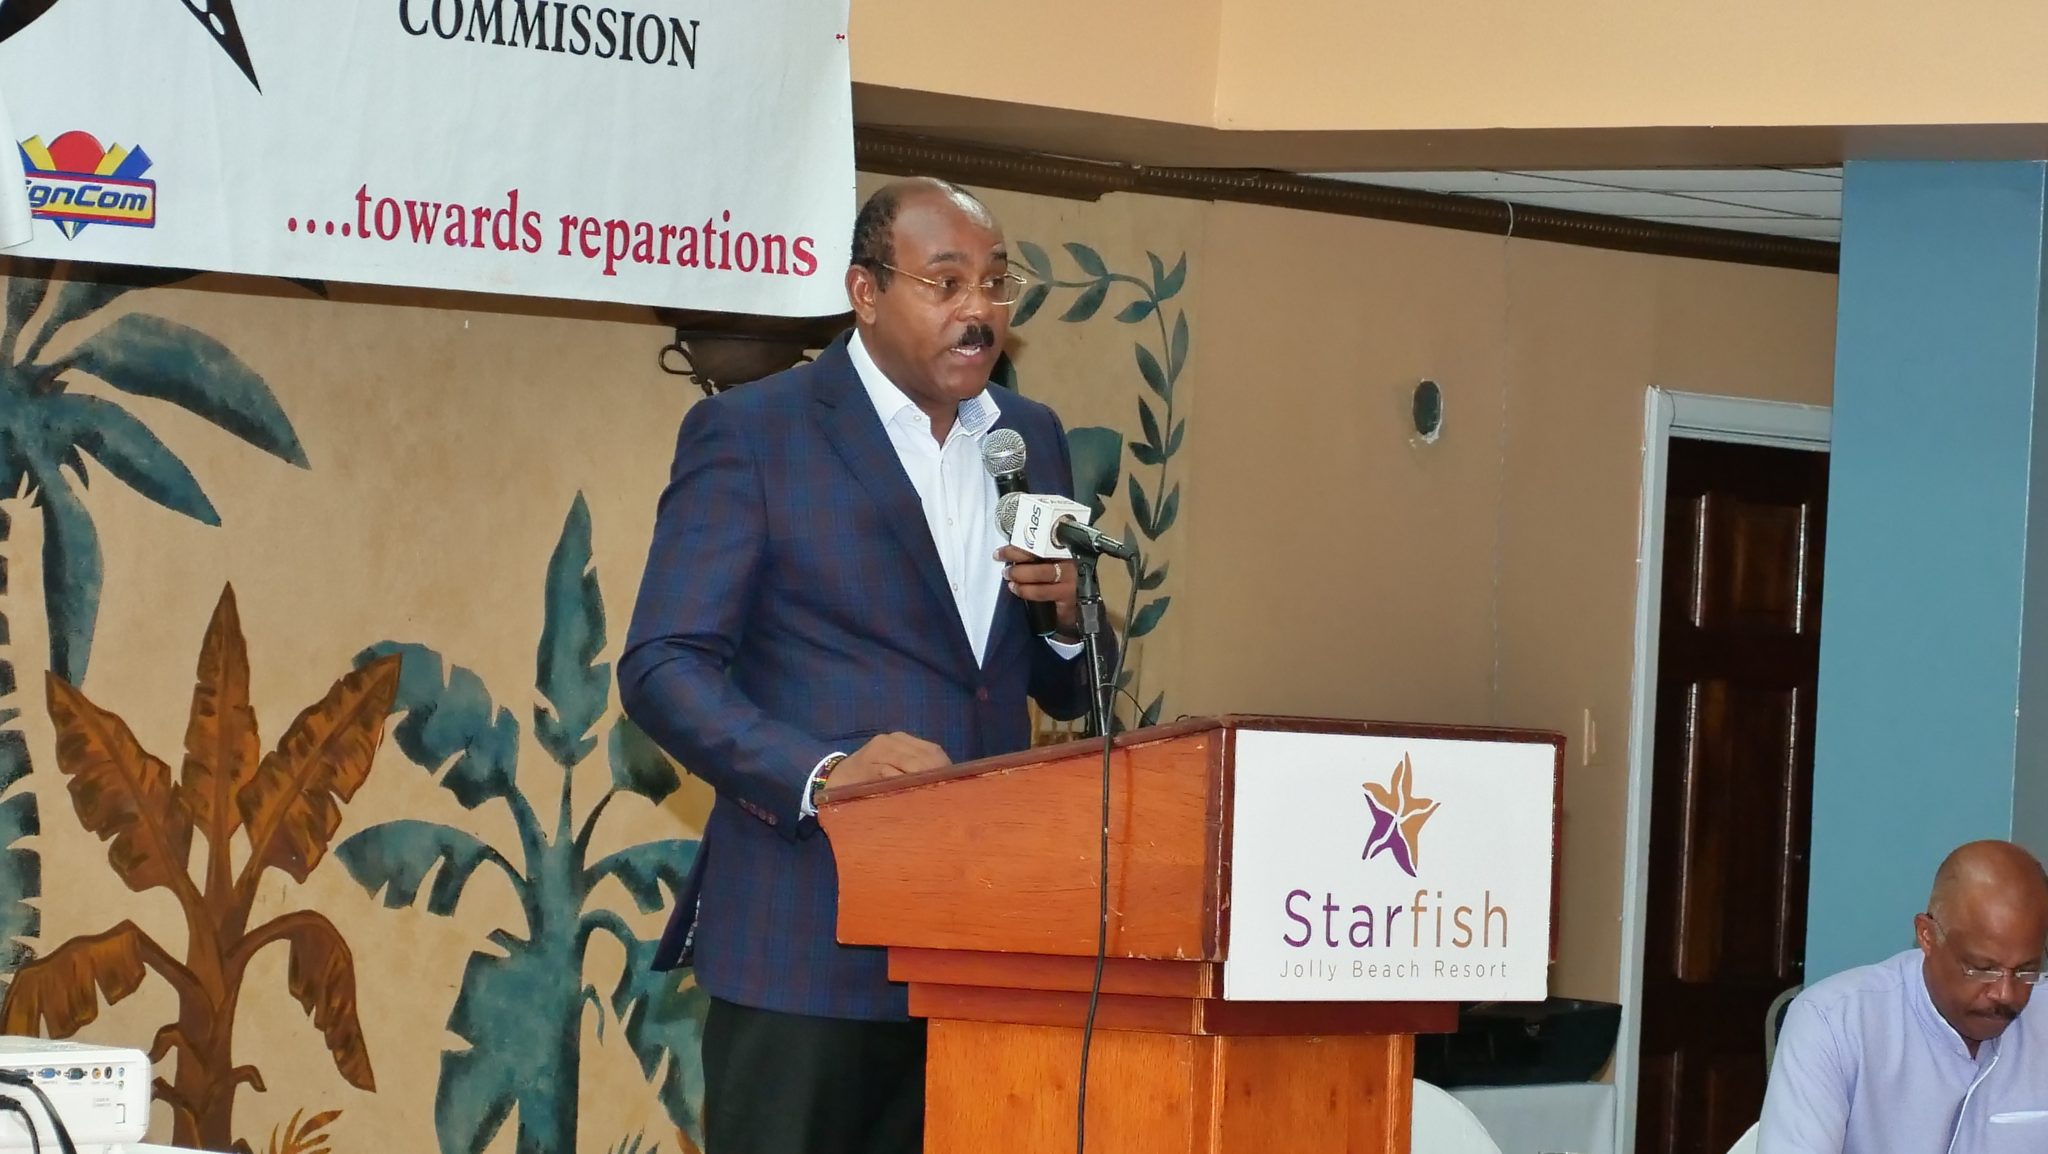  Financial reparations best way to amend wrongs committed – PM Gaston Browne